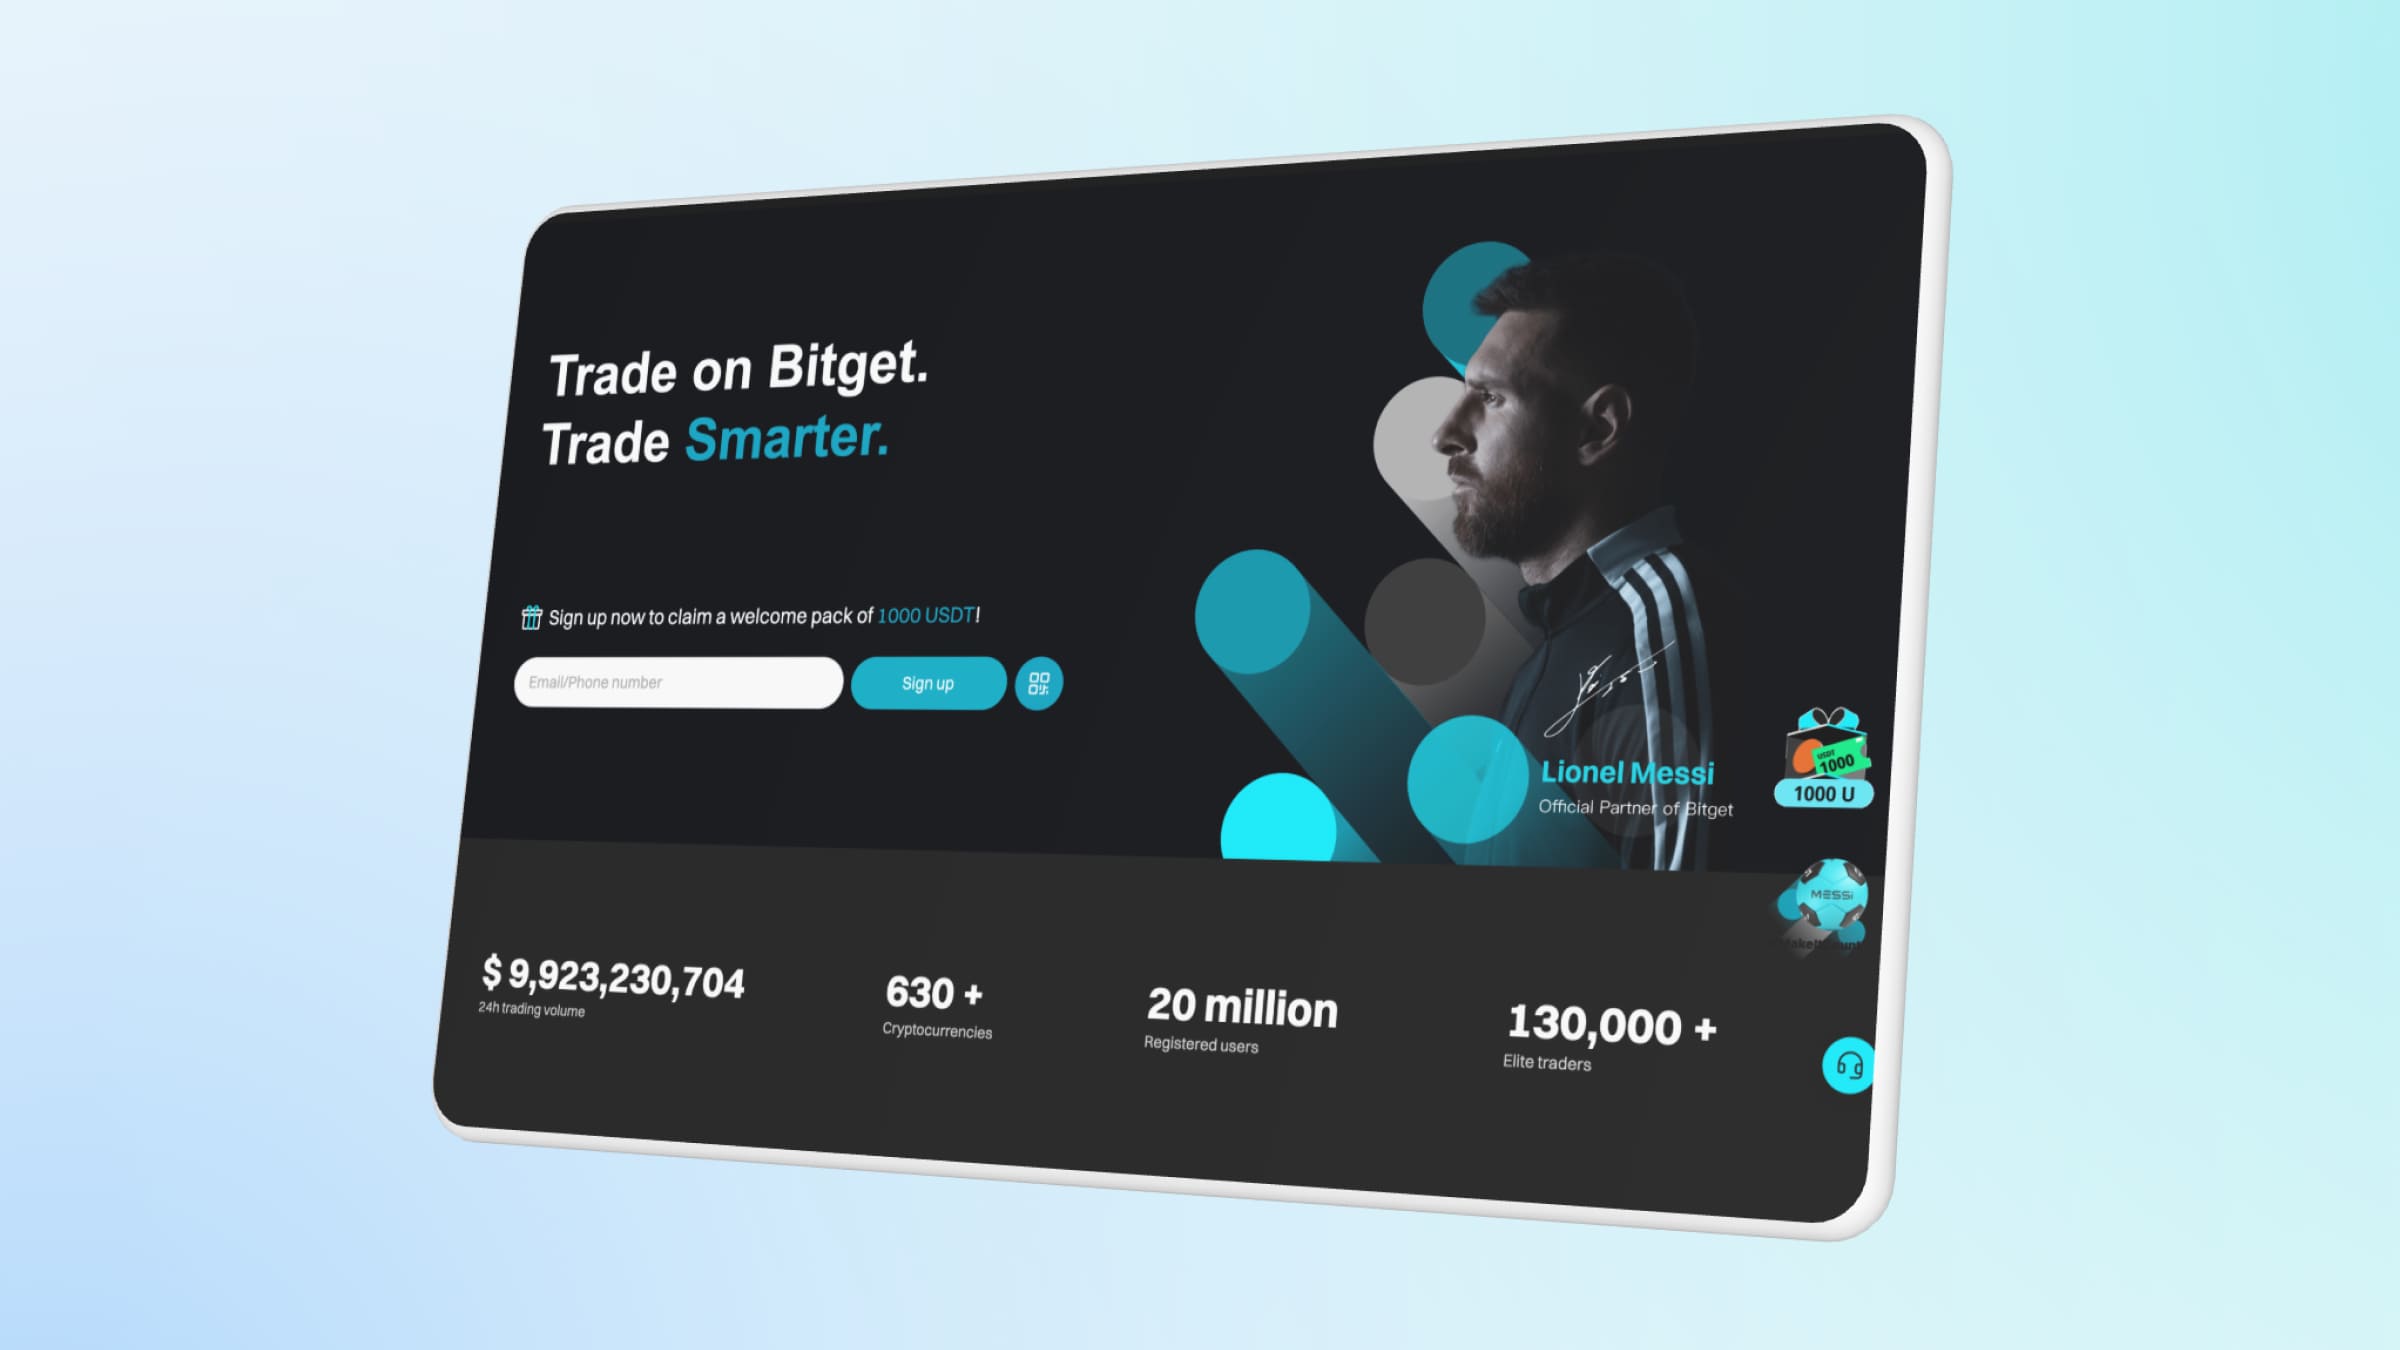 Bitget is a trustworthy platform with proven customer funds reservation and protection fund.